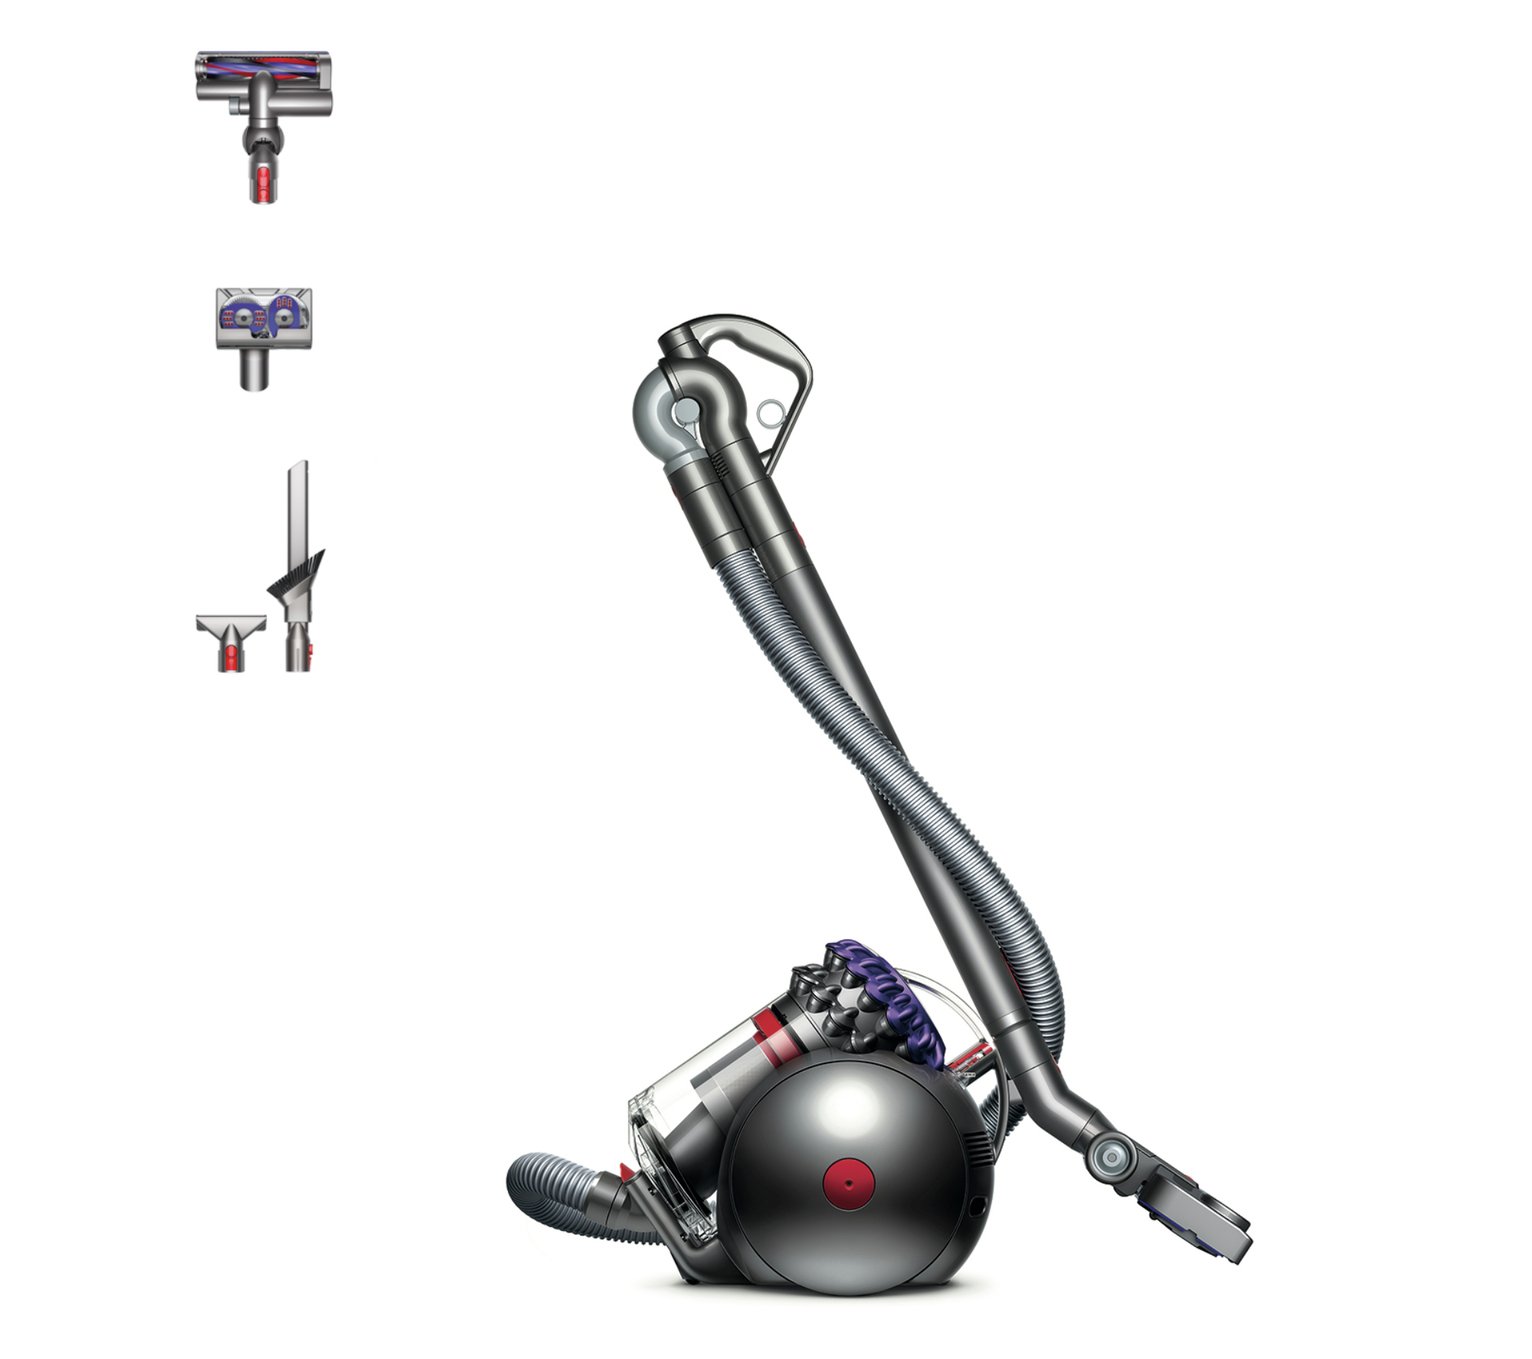 Dyson Big Ball Animal 2 Bagless Cylinder Vacuum Cleaner review